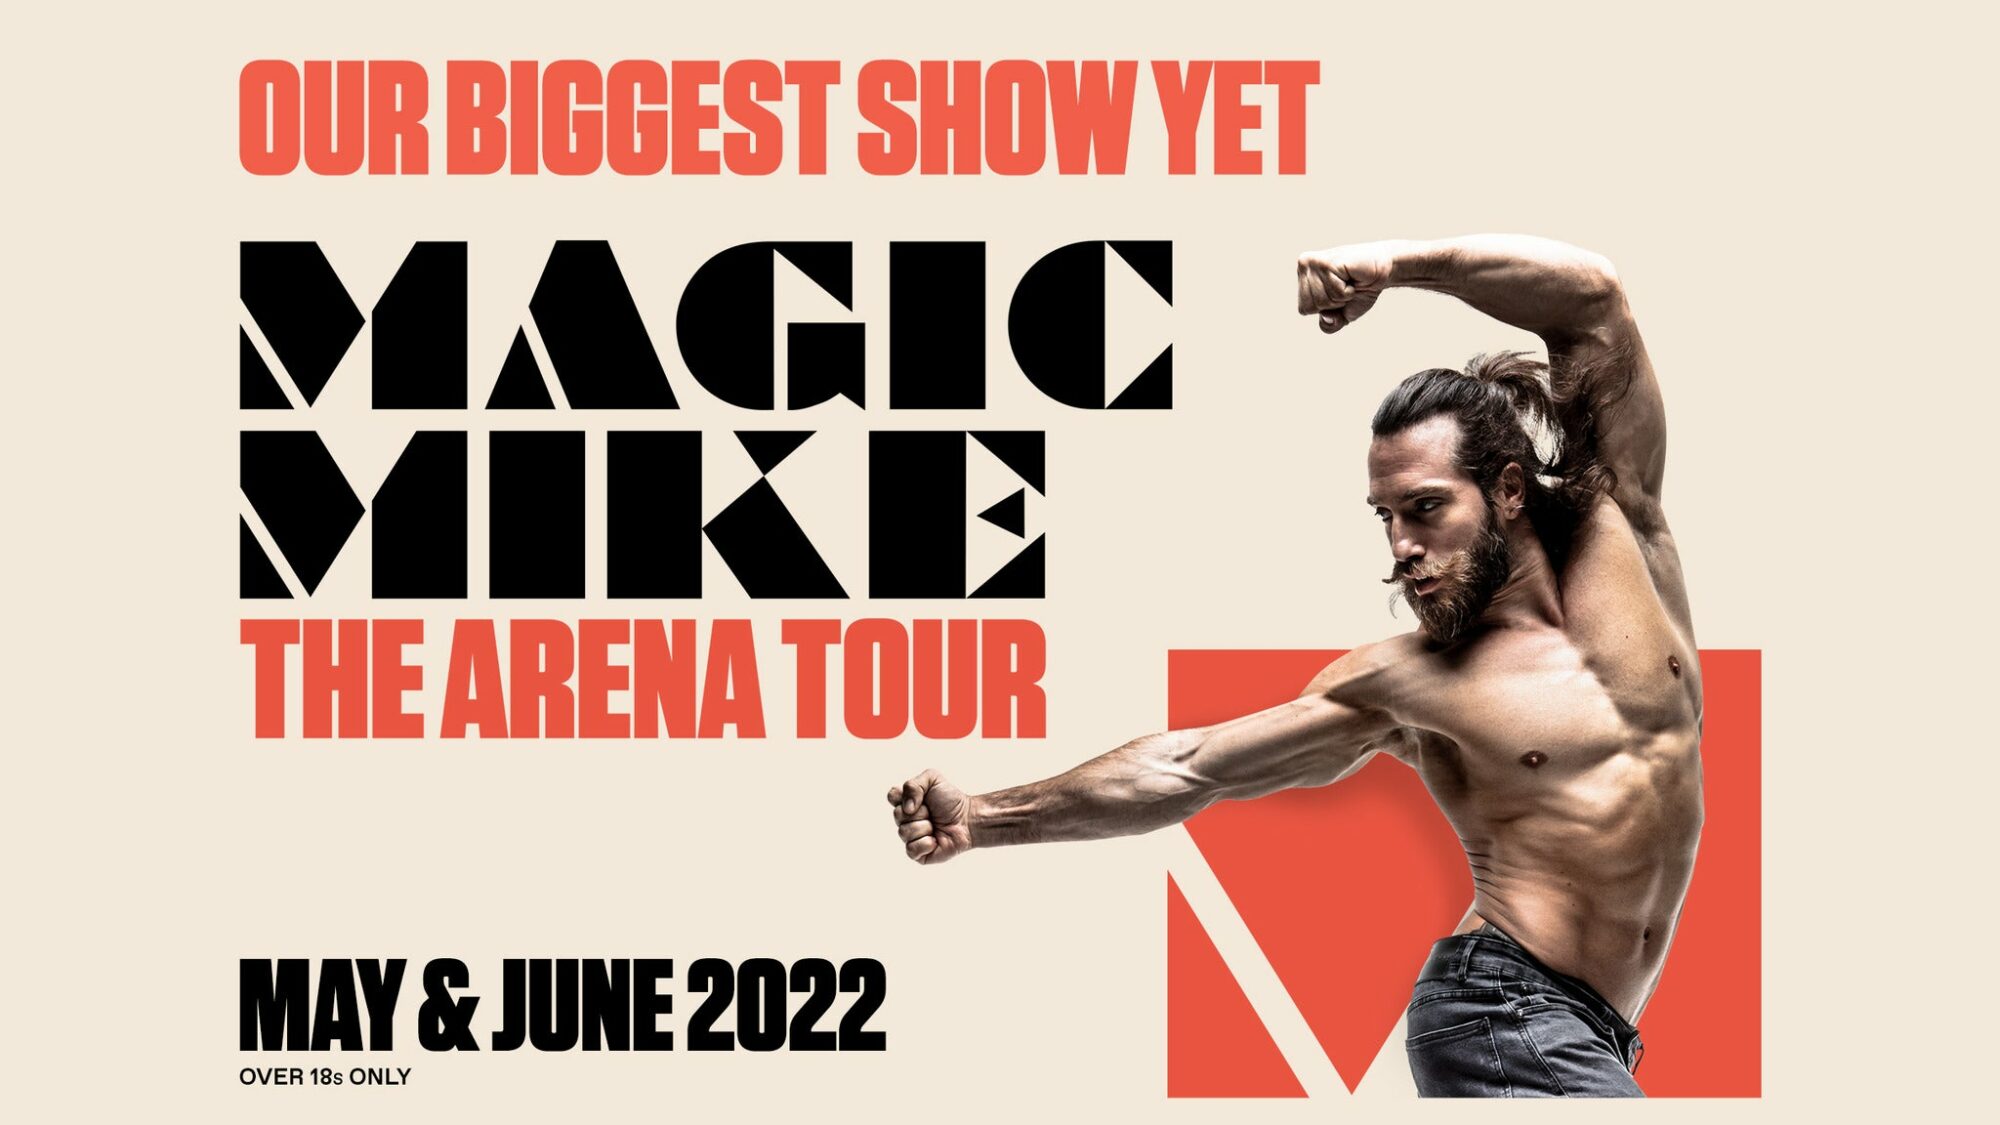 Image name Magic Mike Live Hospitality Experiences at Utilita Arena Sheffield Sheffield the 11 image from the post Magic Mike The Arena Tour at Bonus Arena, Hull, Hull in Yorkshire.com.